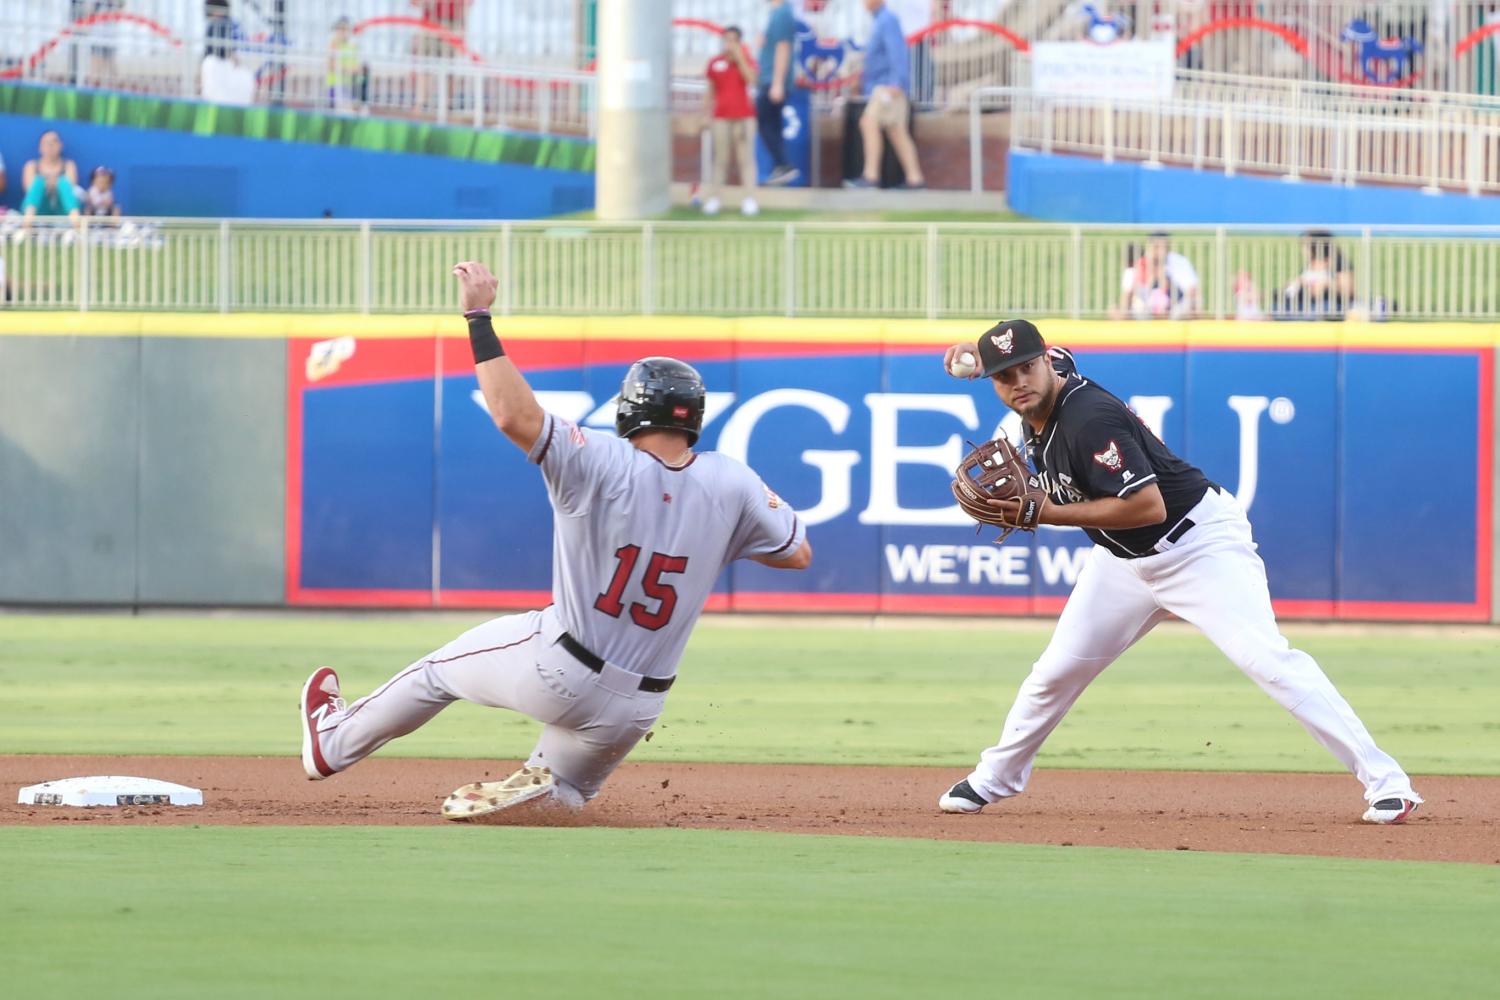 Chihuahuas storm through game one against River Cats